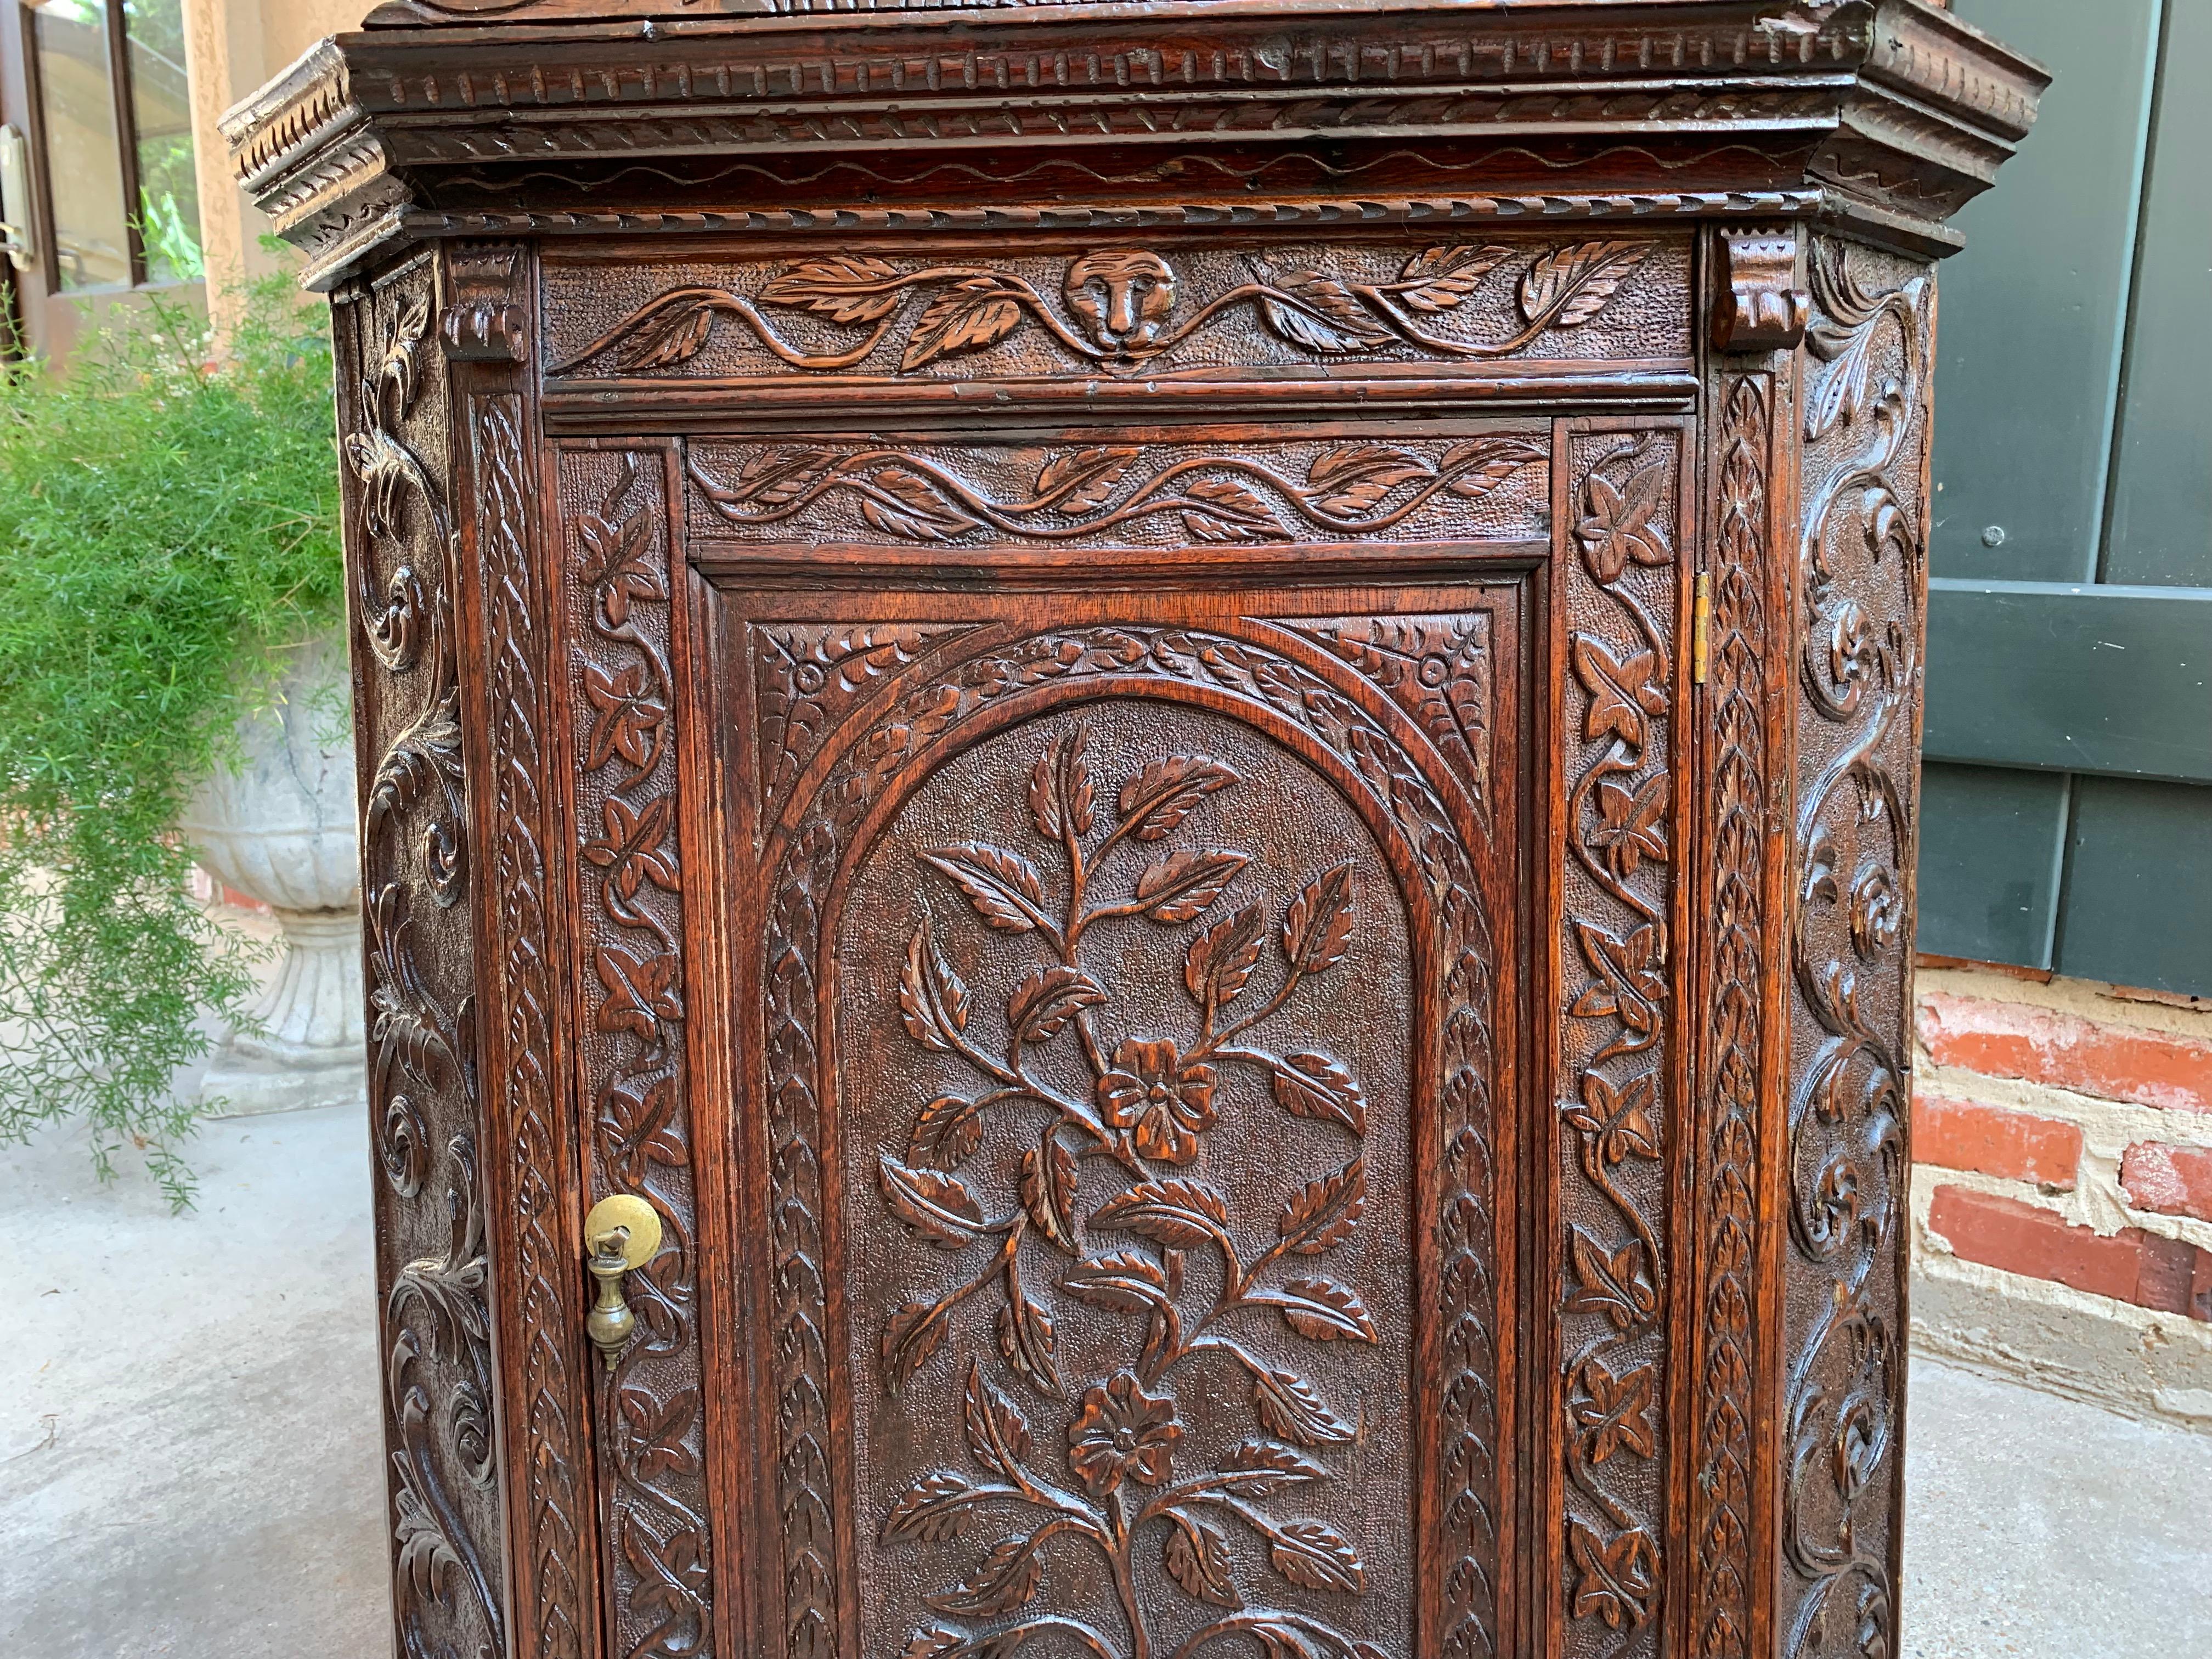 Renaissance Revival 19th Century English Small Carved Oak Corner Wall Cabinet Victorian Stag Deer